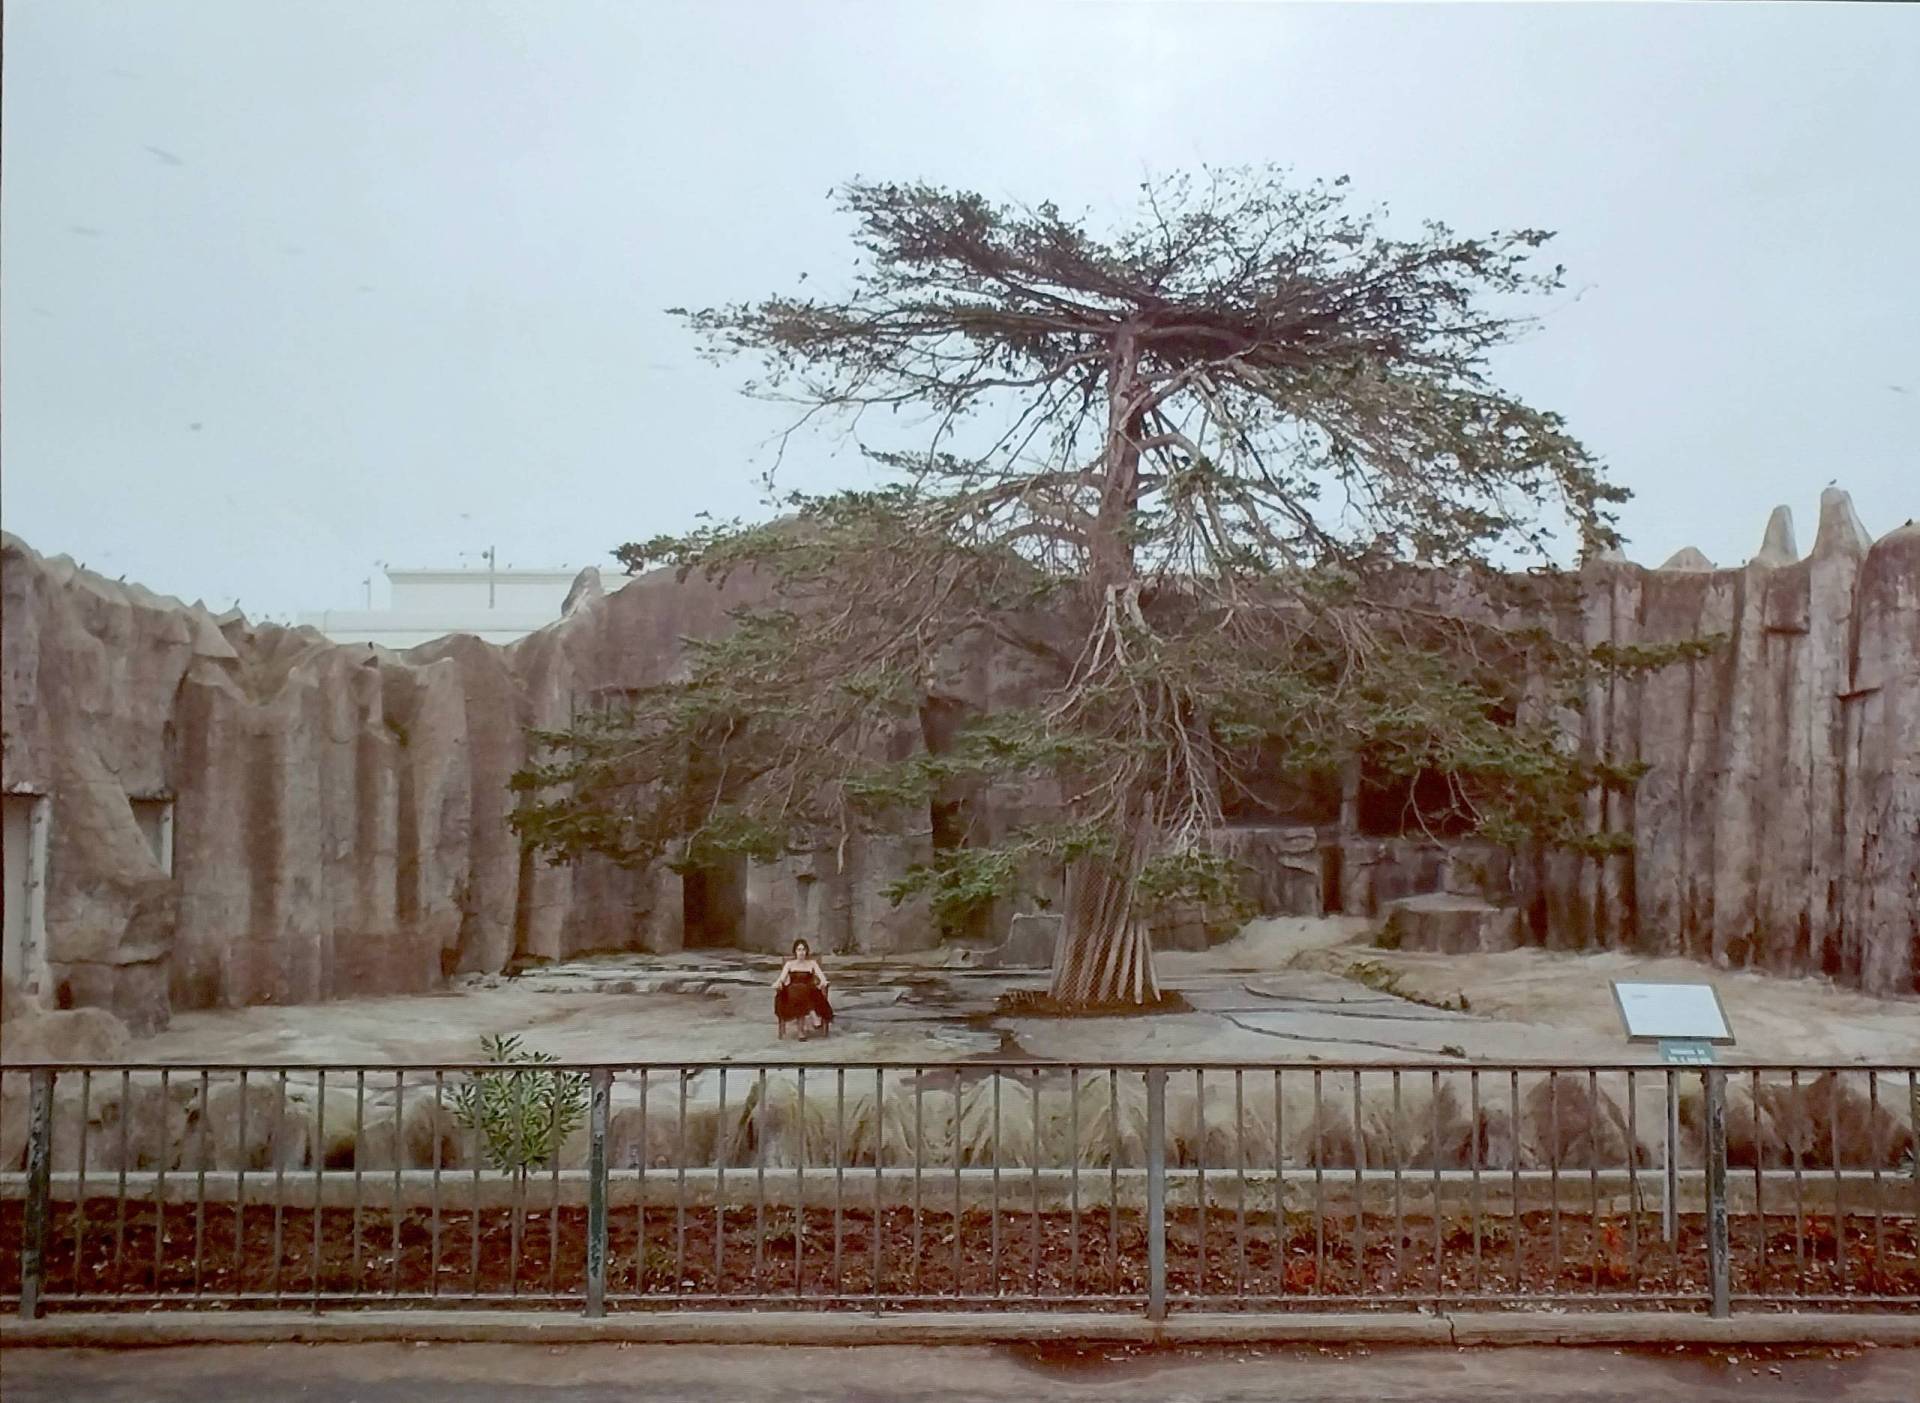 A woman wearing a dress sits in a chair next to a huge tree inside an animal pen at a zoo.